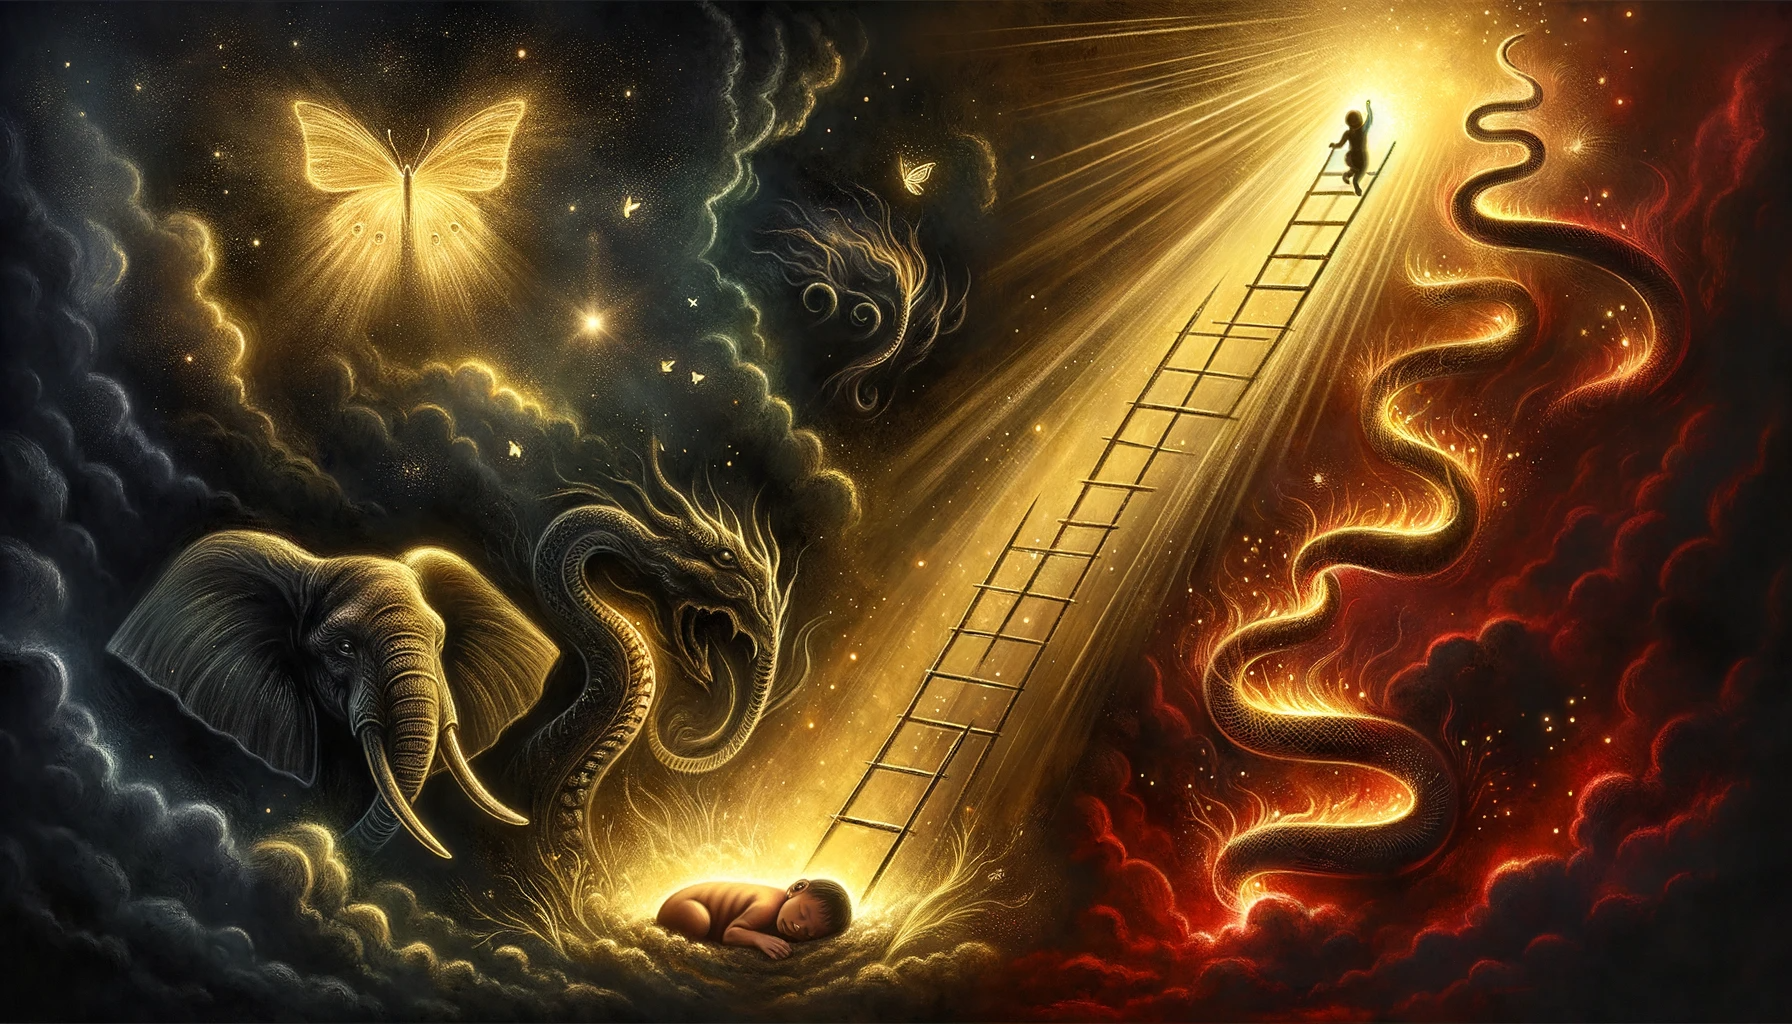 DALL·E 2023 10 26 18.02.10 Illustration awash with a palette of dark transitioning to fiery red and radiant gold capturing a dreamlike scene of lifes wonders. A ladder craft